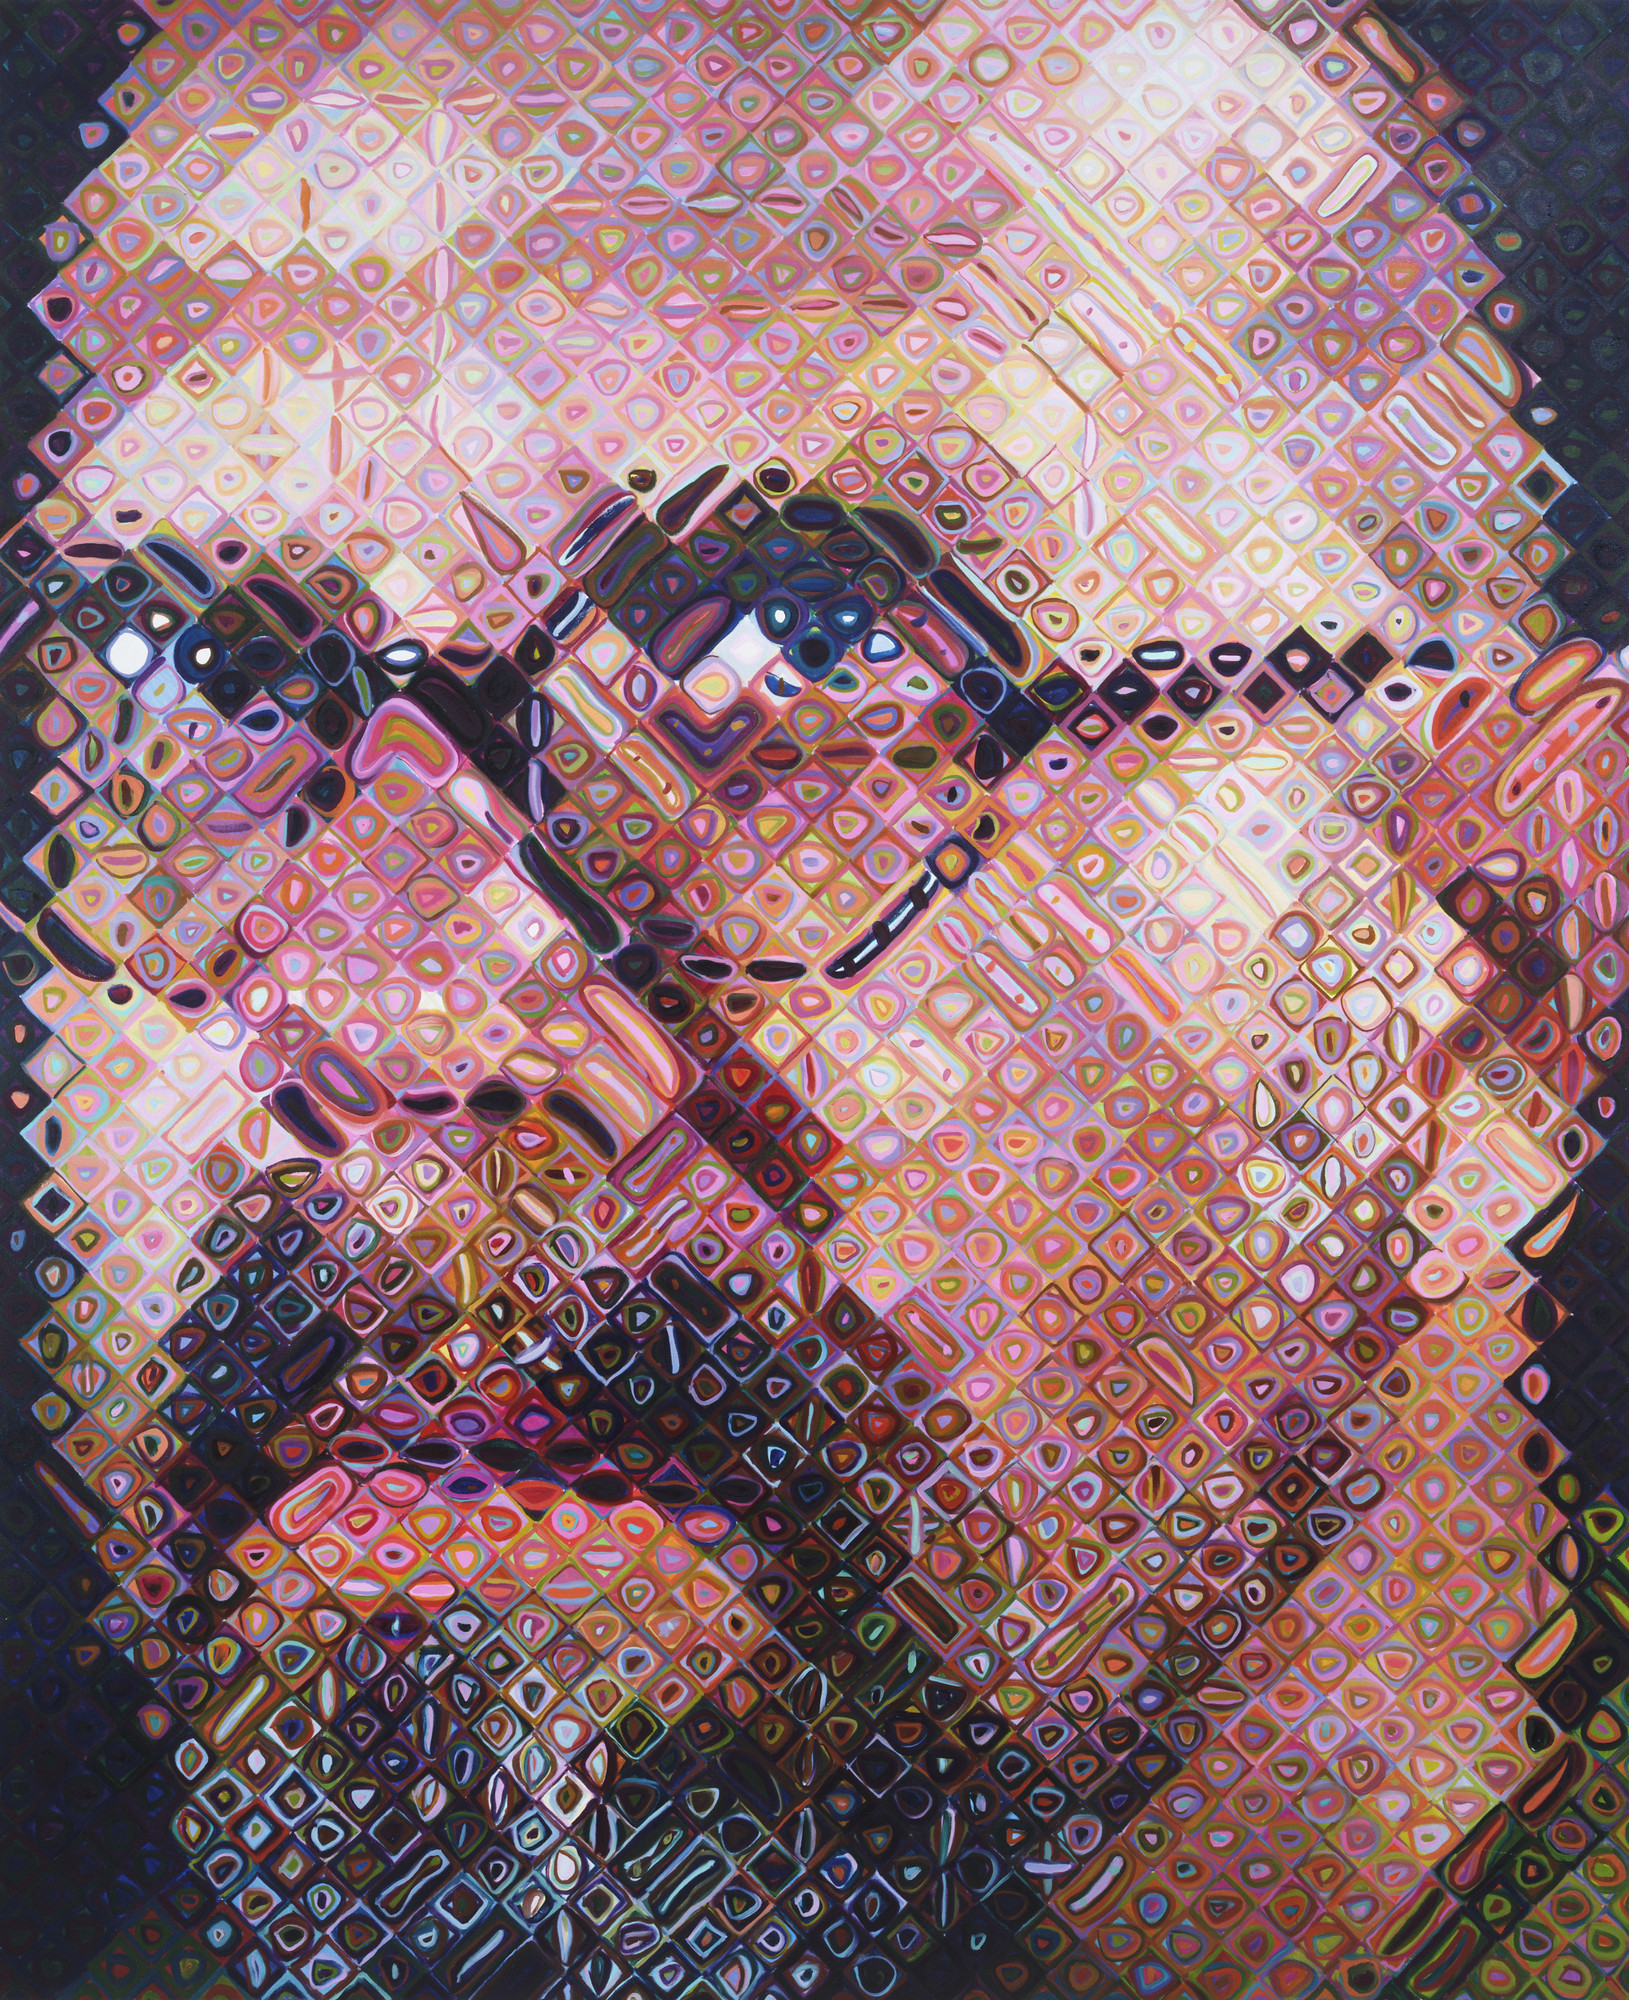 chuck close drawings of the 1970s